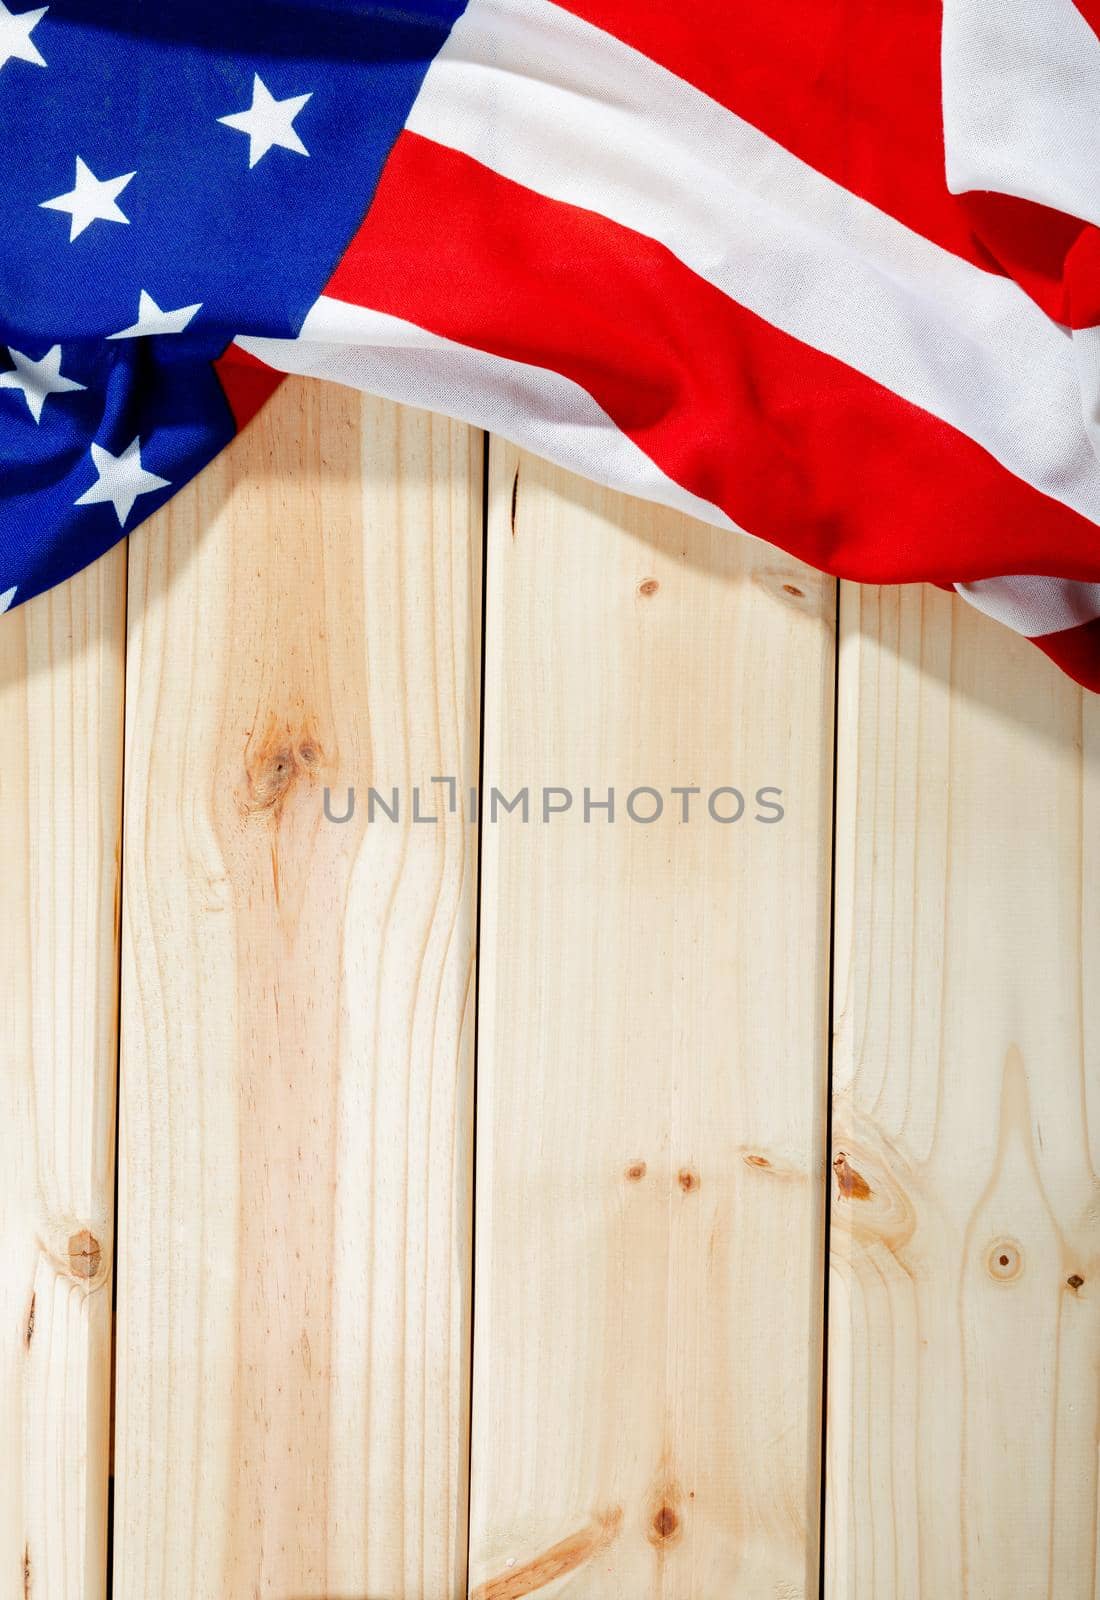 Overhead view of red and white stripes along with stars on america flag over wooden table. patriotism, identity and copy space.